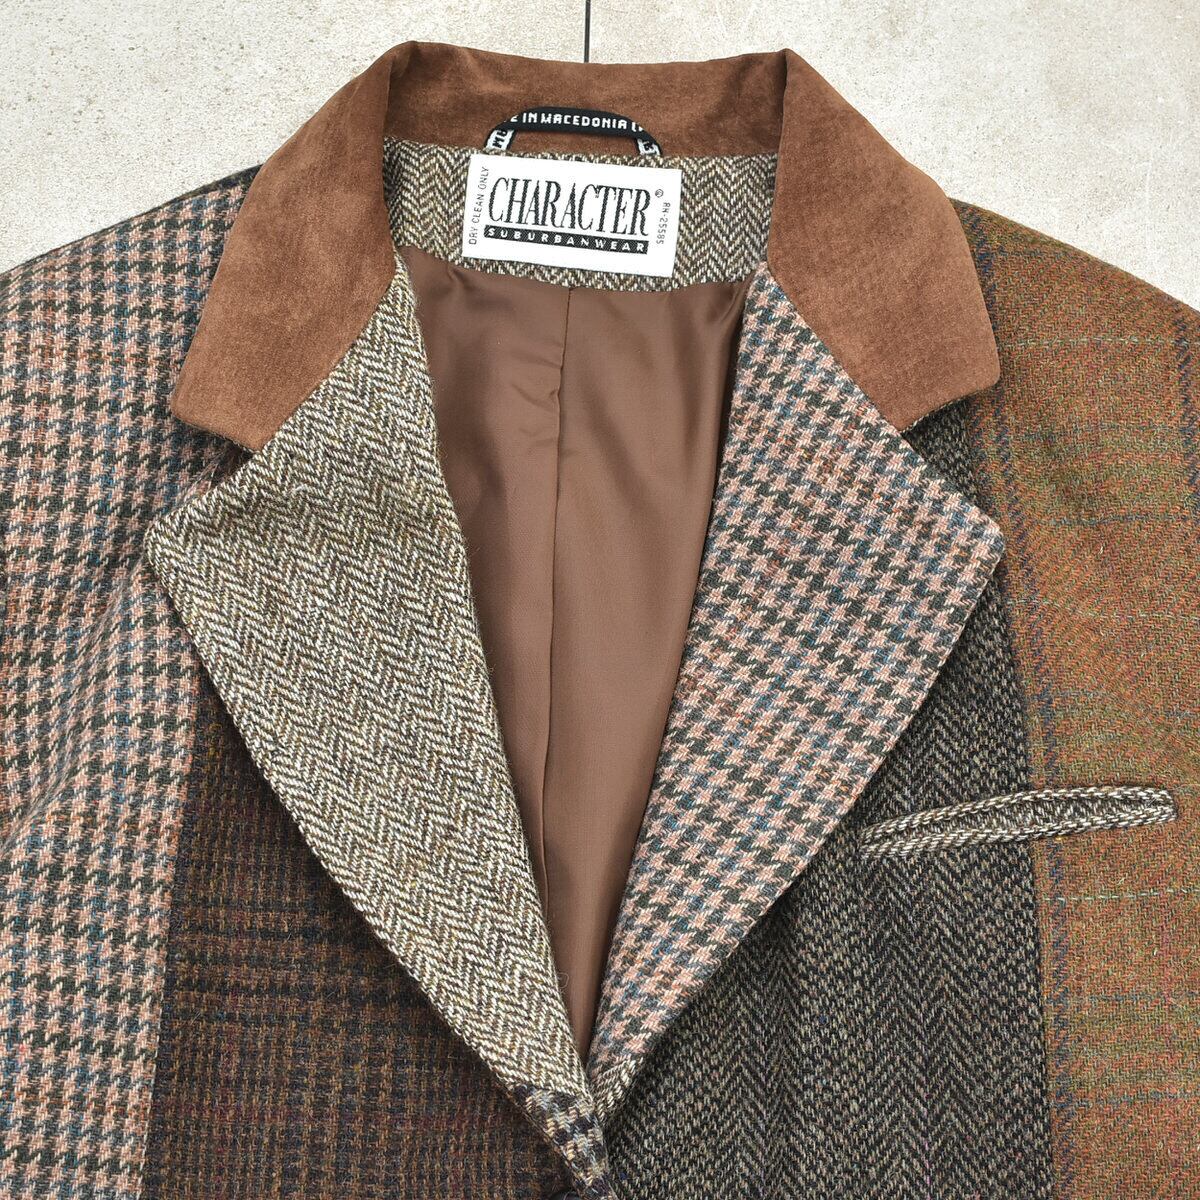 's CHARACTER crazy pattern tweed jkt   古着屋 grin days memory